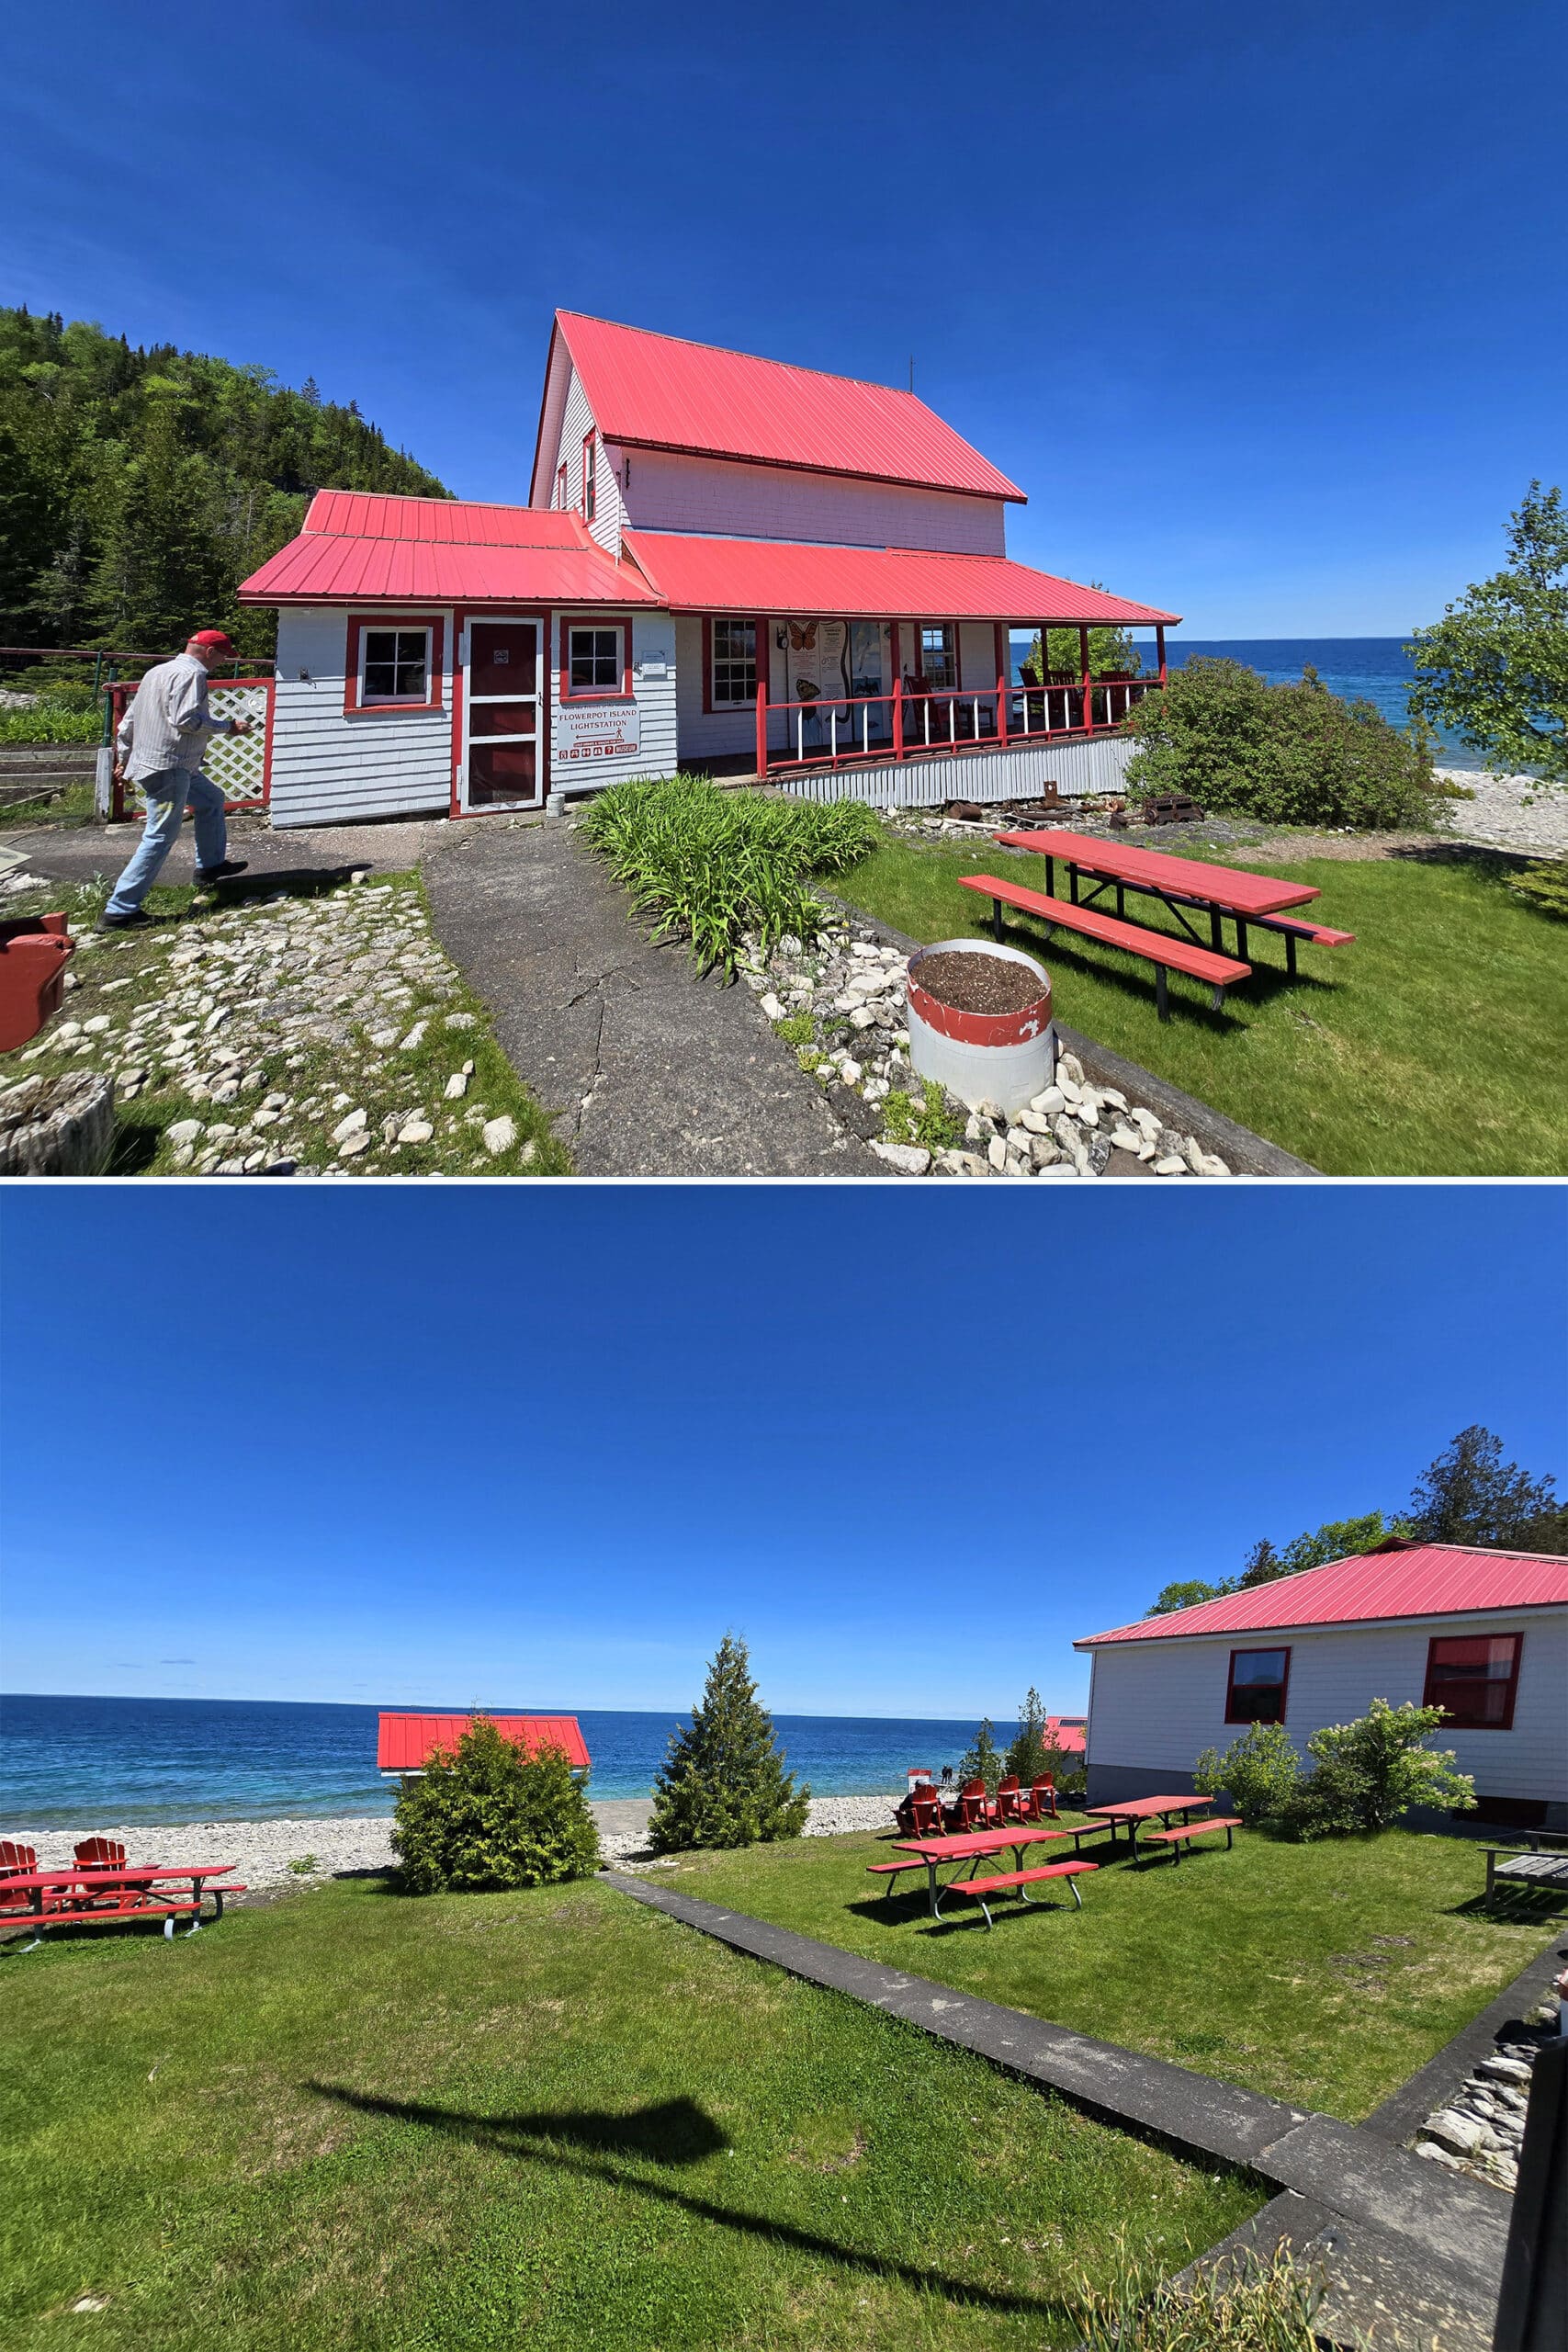 2 part image showing the lightstation and picnic area.